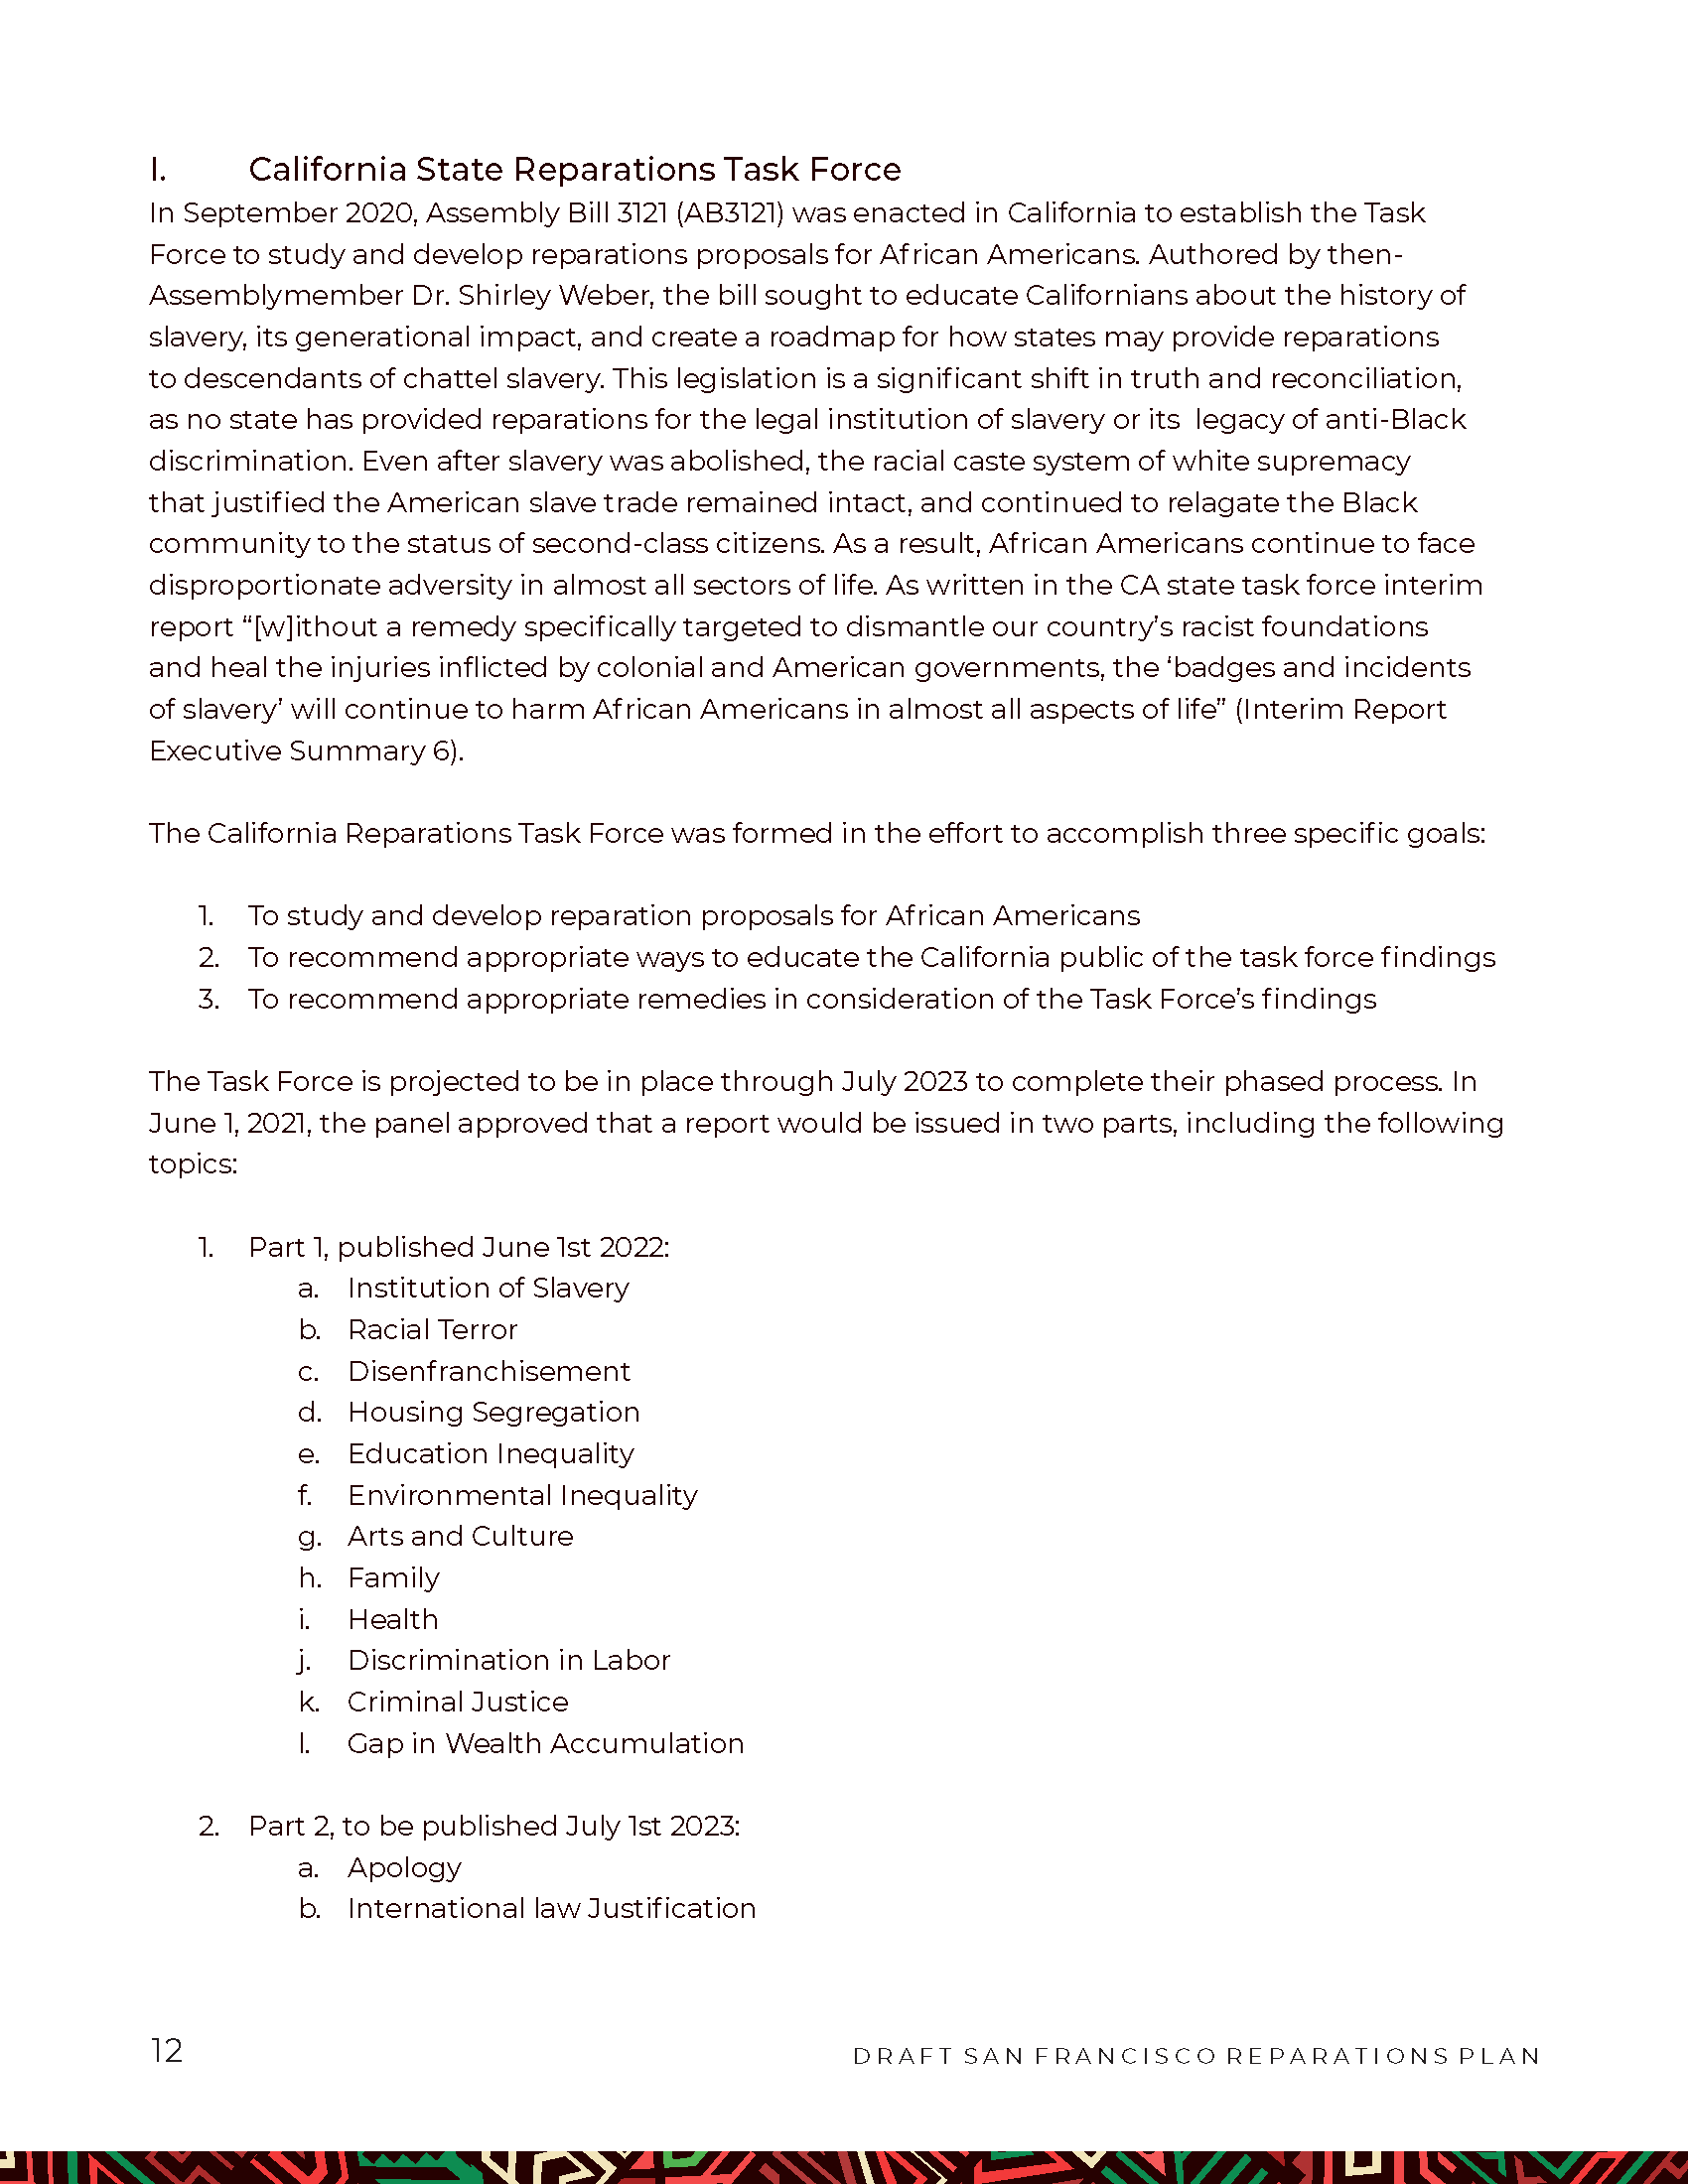 HRC Reparations 2022 Report Final_0_Page_12.png